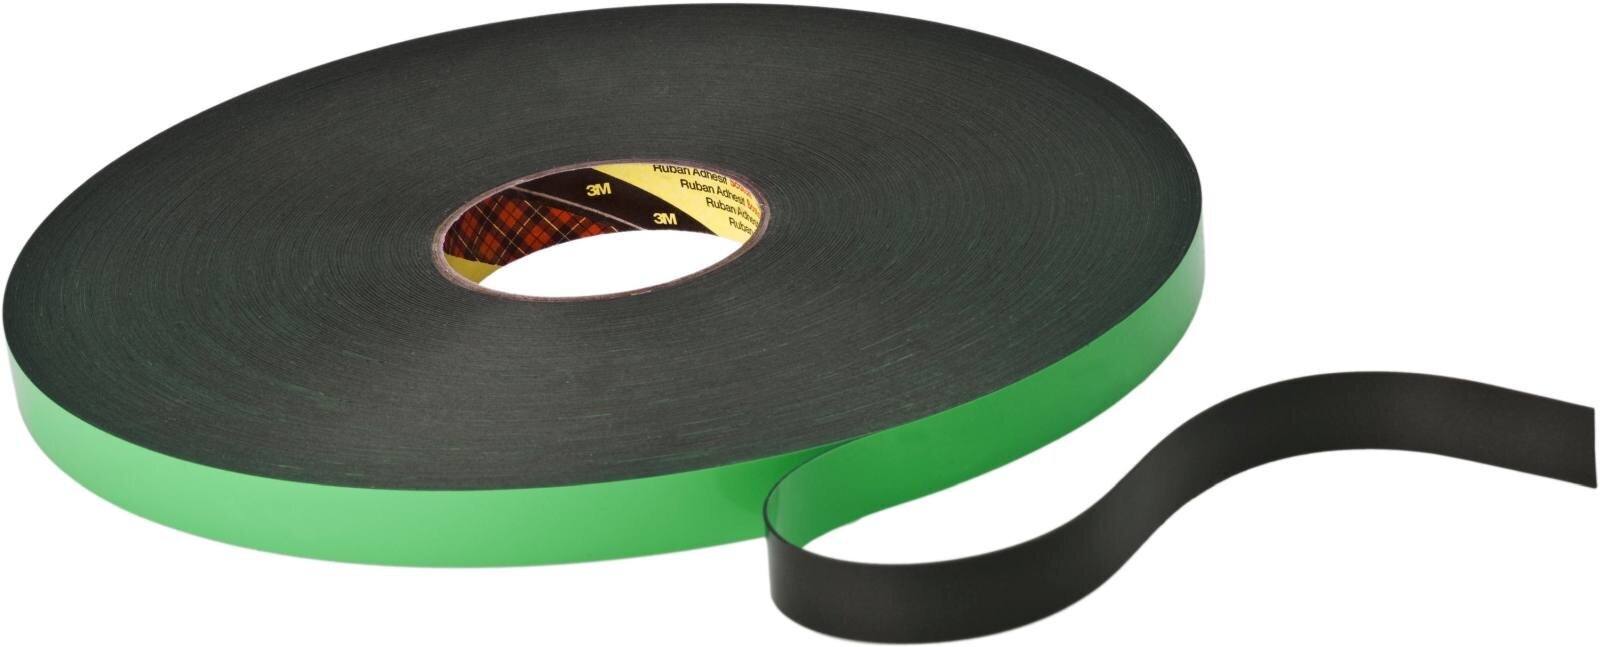 3M Double-sided PE foam tape with acrylic adhesive 9508B, black, 19 mm x 66 m, 0.8 mm